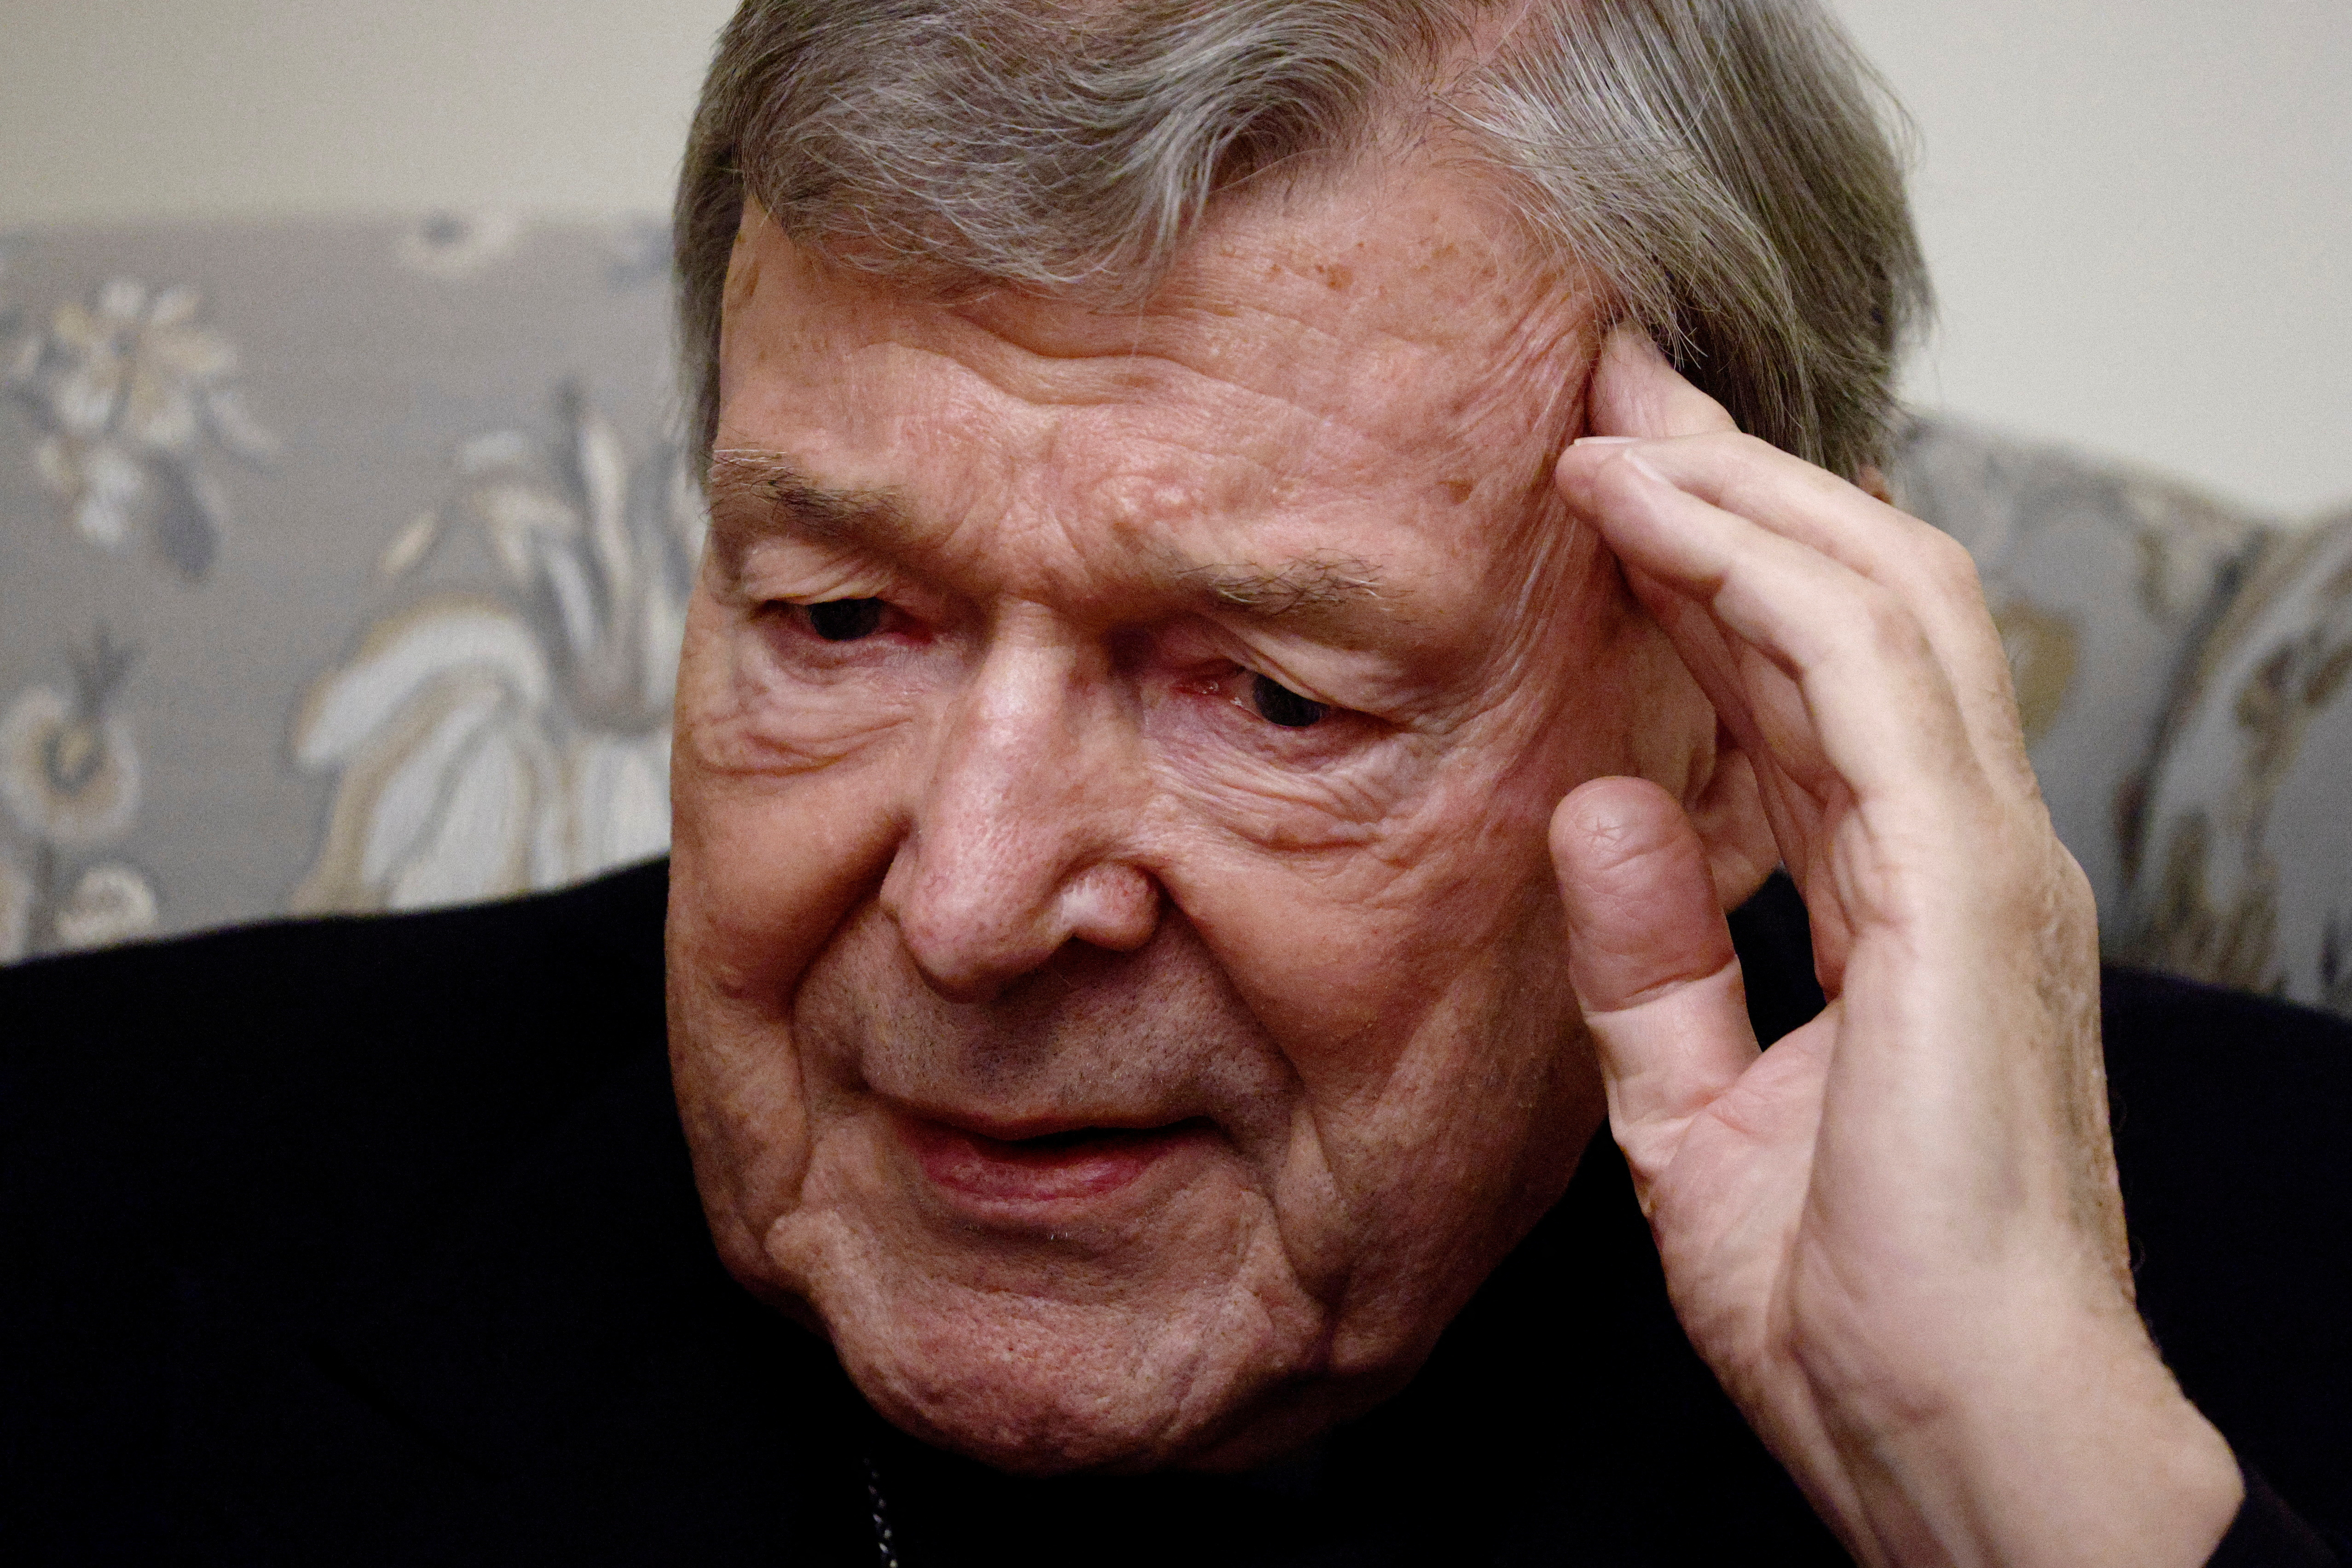 Australian Cardinal Pell talks about his time in jail and his future plans, in Rome